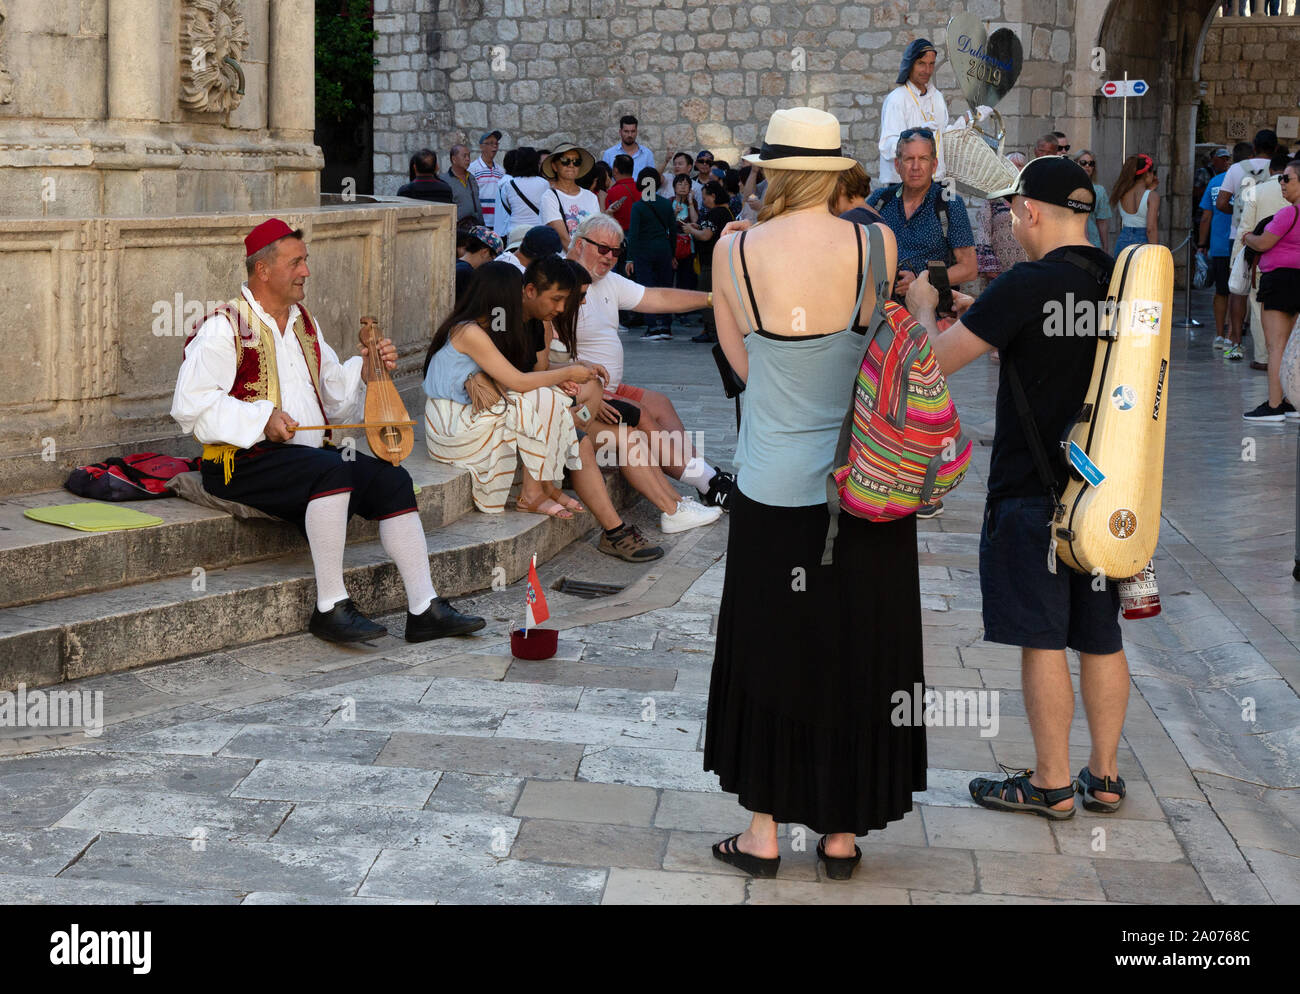 Dubrovnik busker - street entertainer dressed in traditional clothes playing a musical instrument; the Onofrio fountain, Dubrovnik old town, Croatia Stock Photo